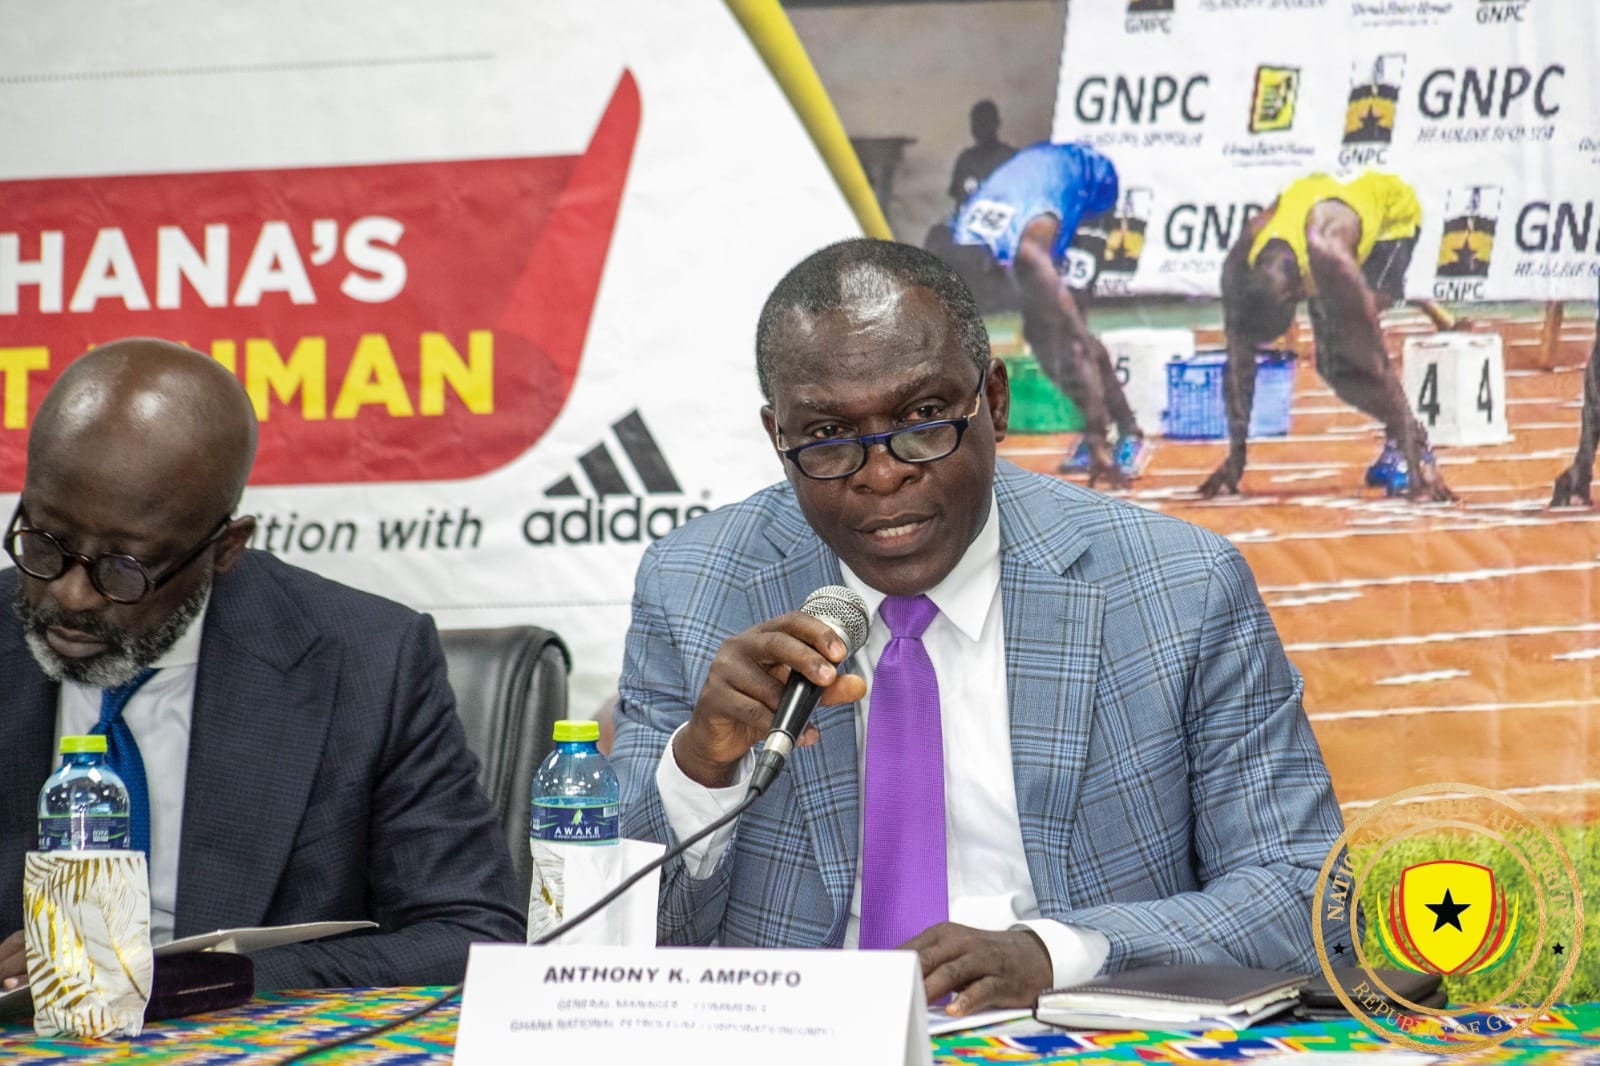 The tenth edition of the sprint talent search, Ghana Fastest Human, was launched at Accra Stadium with next year's African Games in Ghana very much in mind ©Ghana Olympic Committee/Facebook